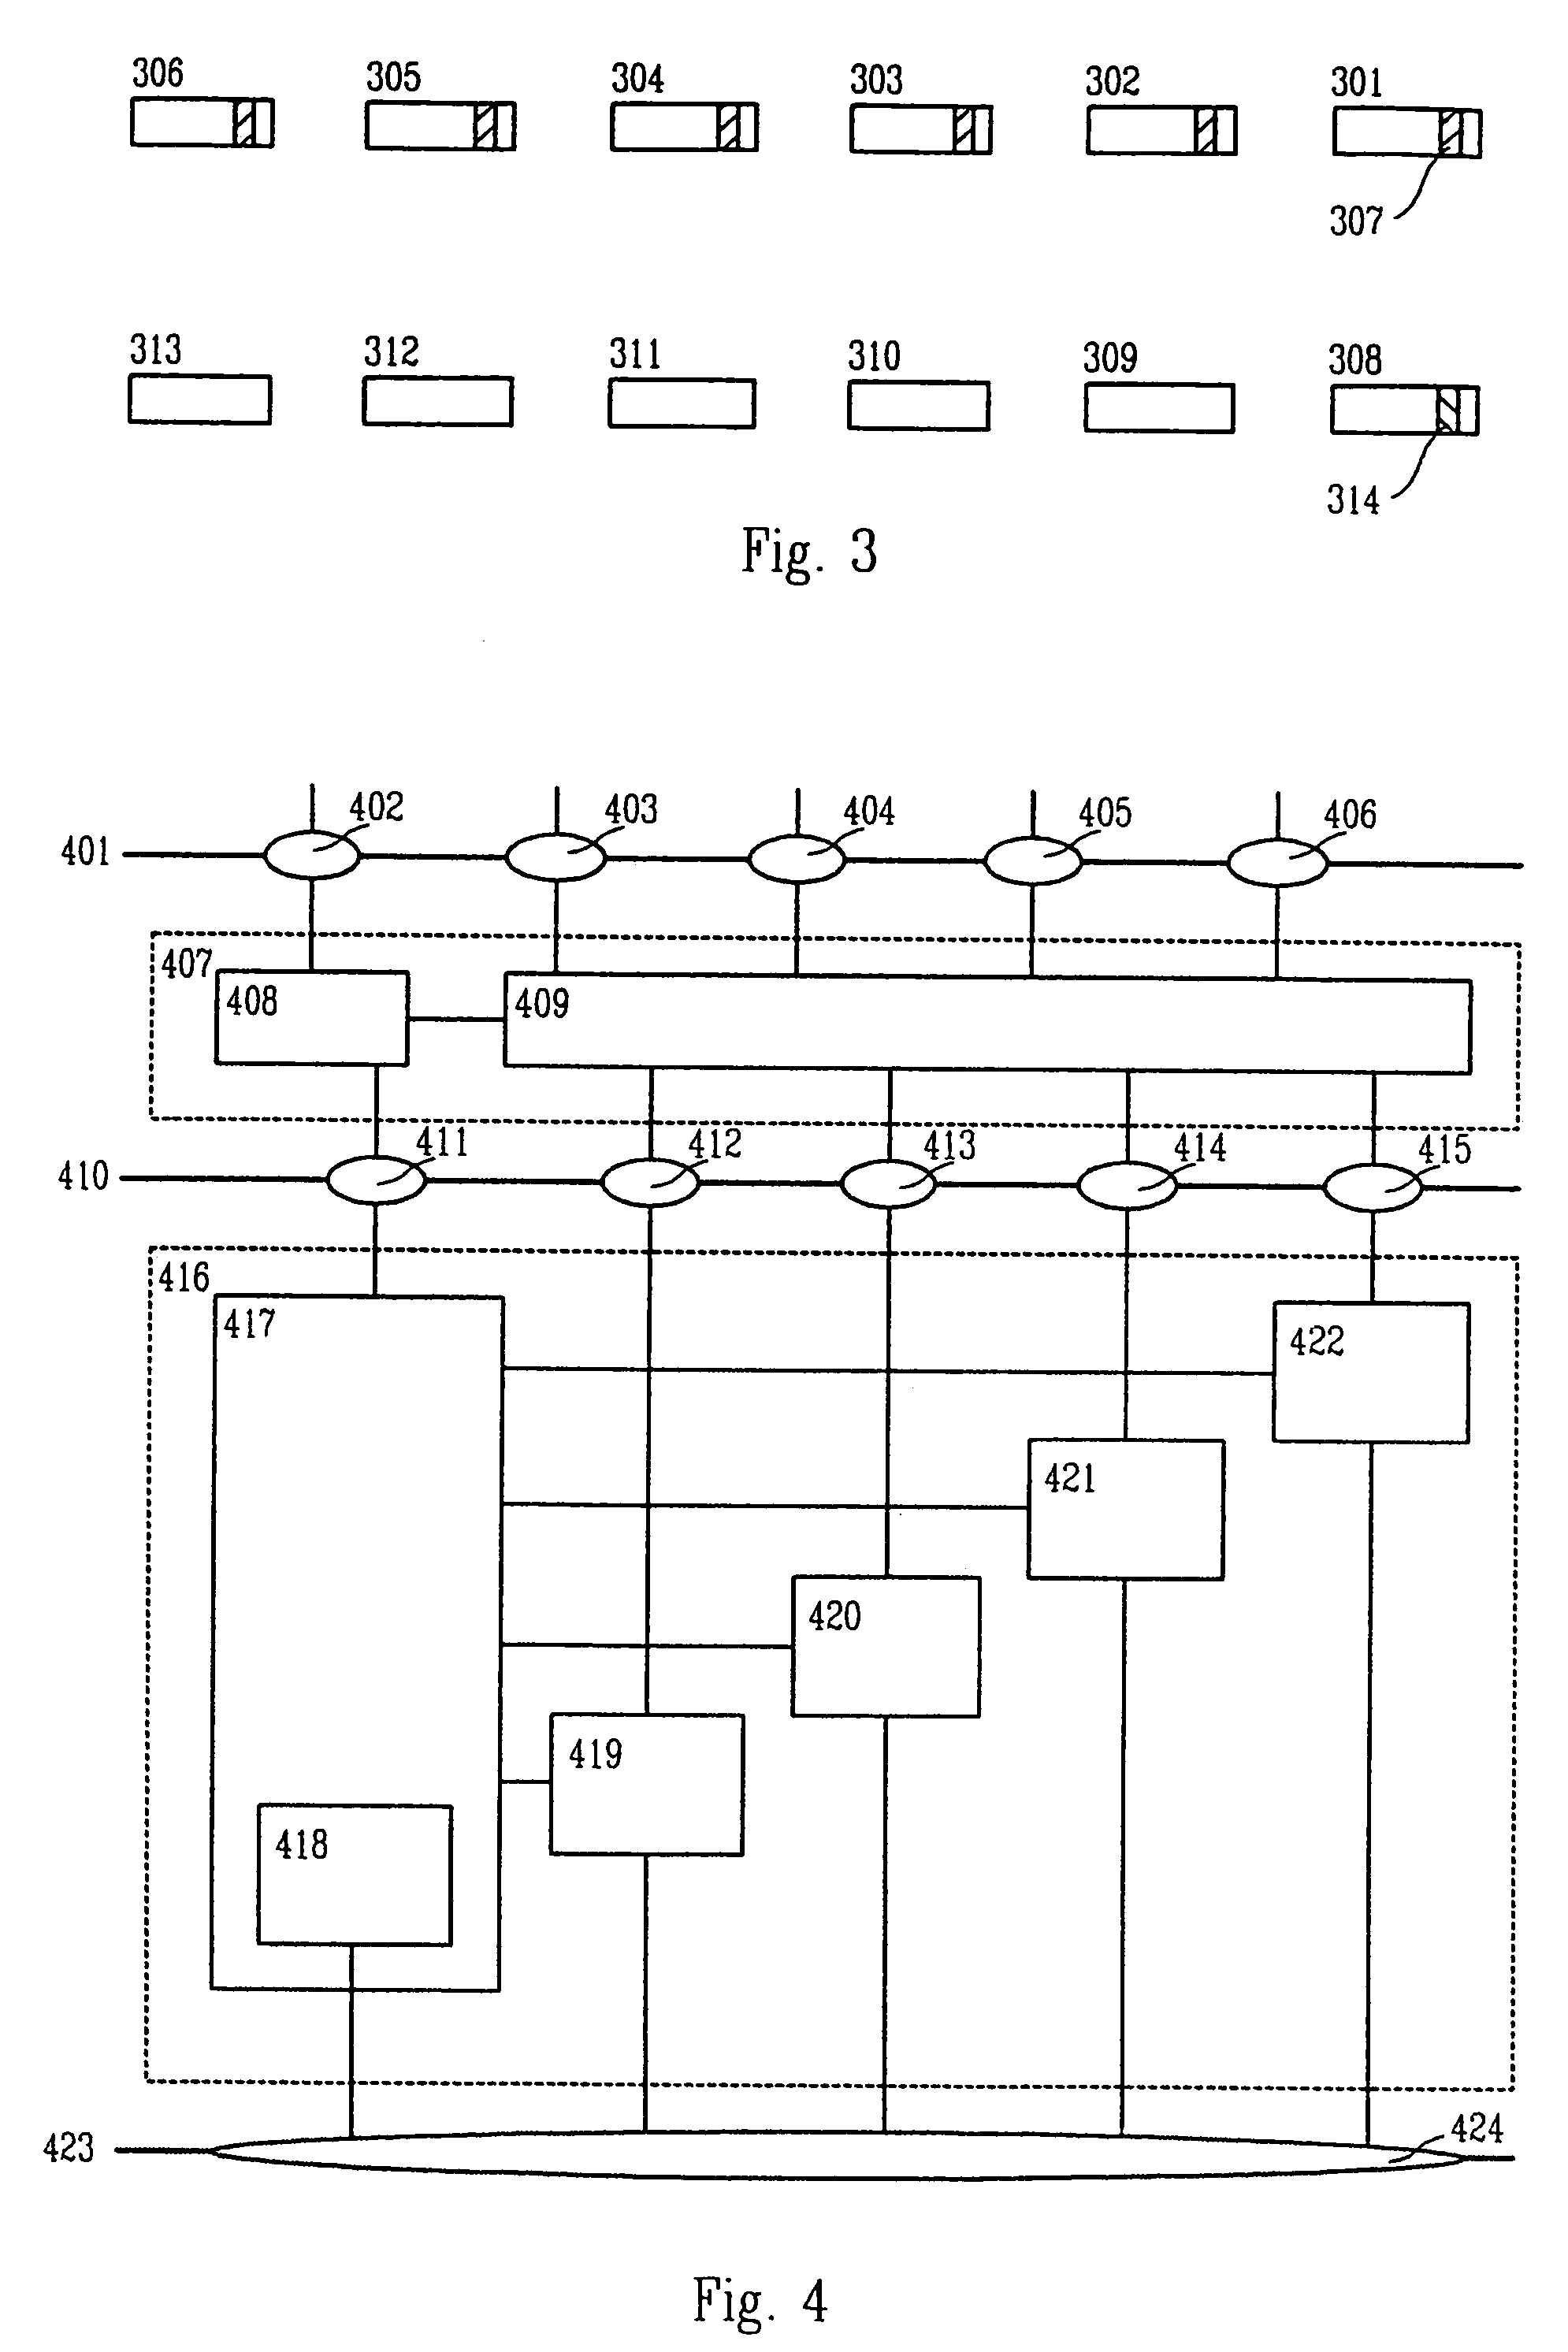 Method for informing layers of a protocol stack about the protocol in use